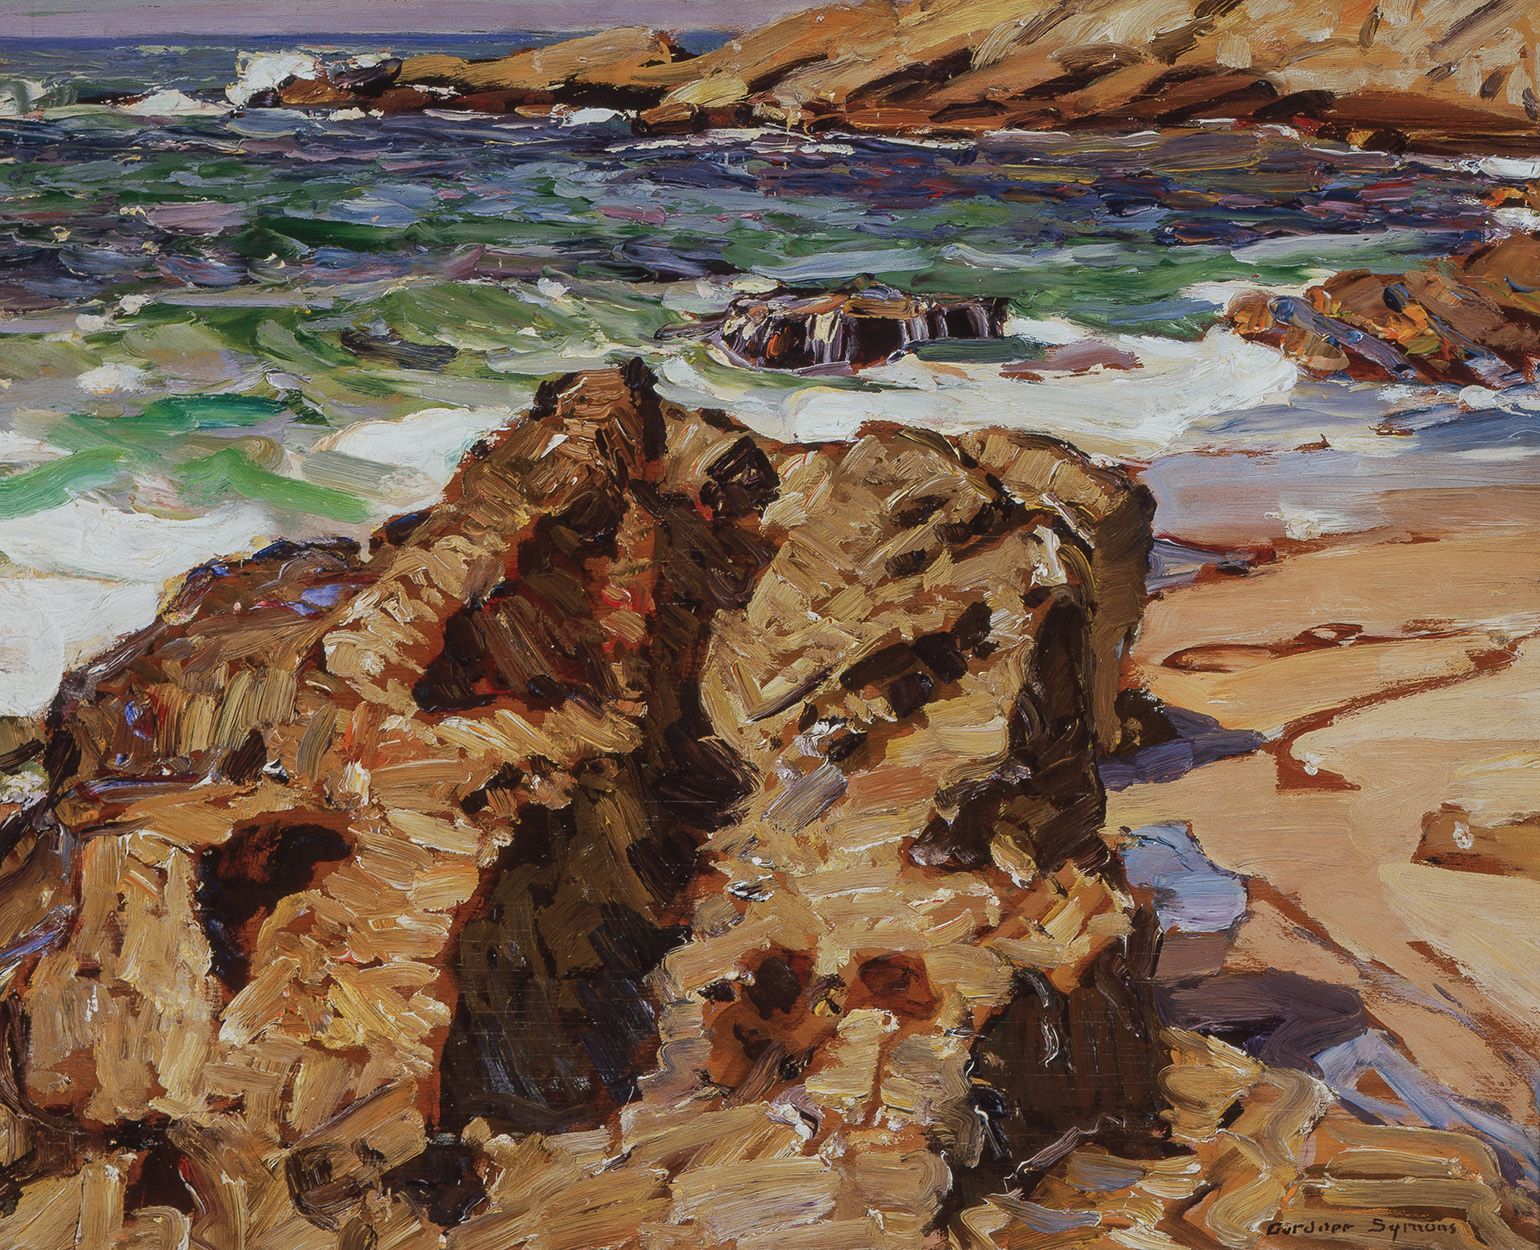 George Gardner Symons, Heisler Cove, circa 1916, Oil on panel, 17 x 21 in. The Buck Collection at UCI Institute and Museum of California Art